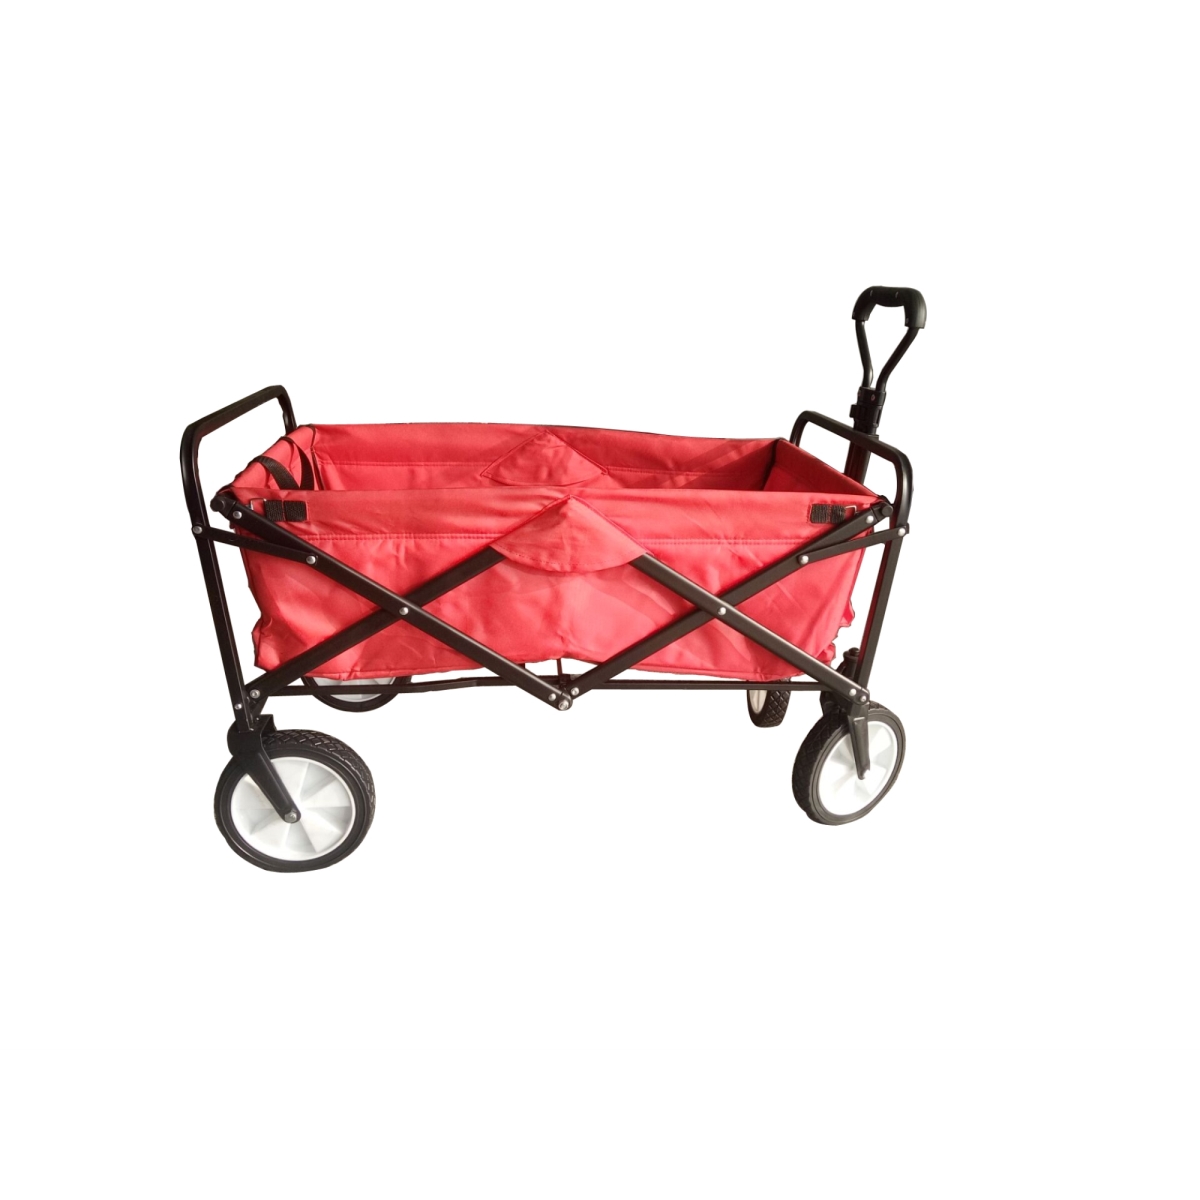 Luxen Home Whgs601 Collapsible Folding Outdoor Utility Wagon Red